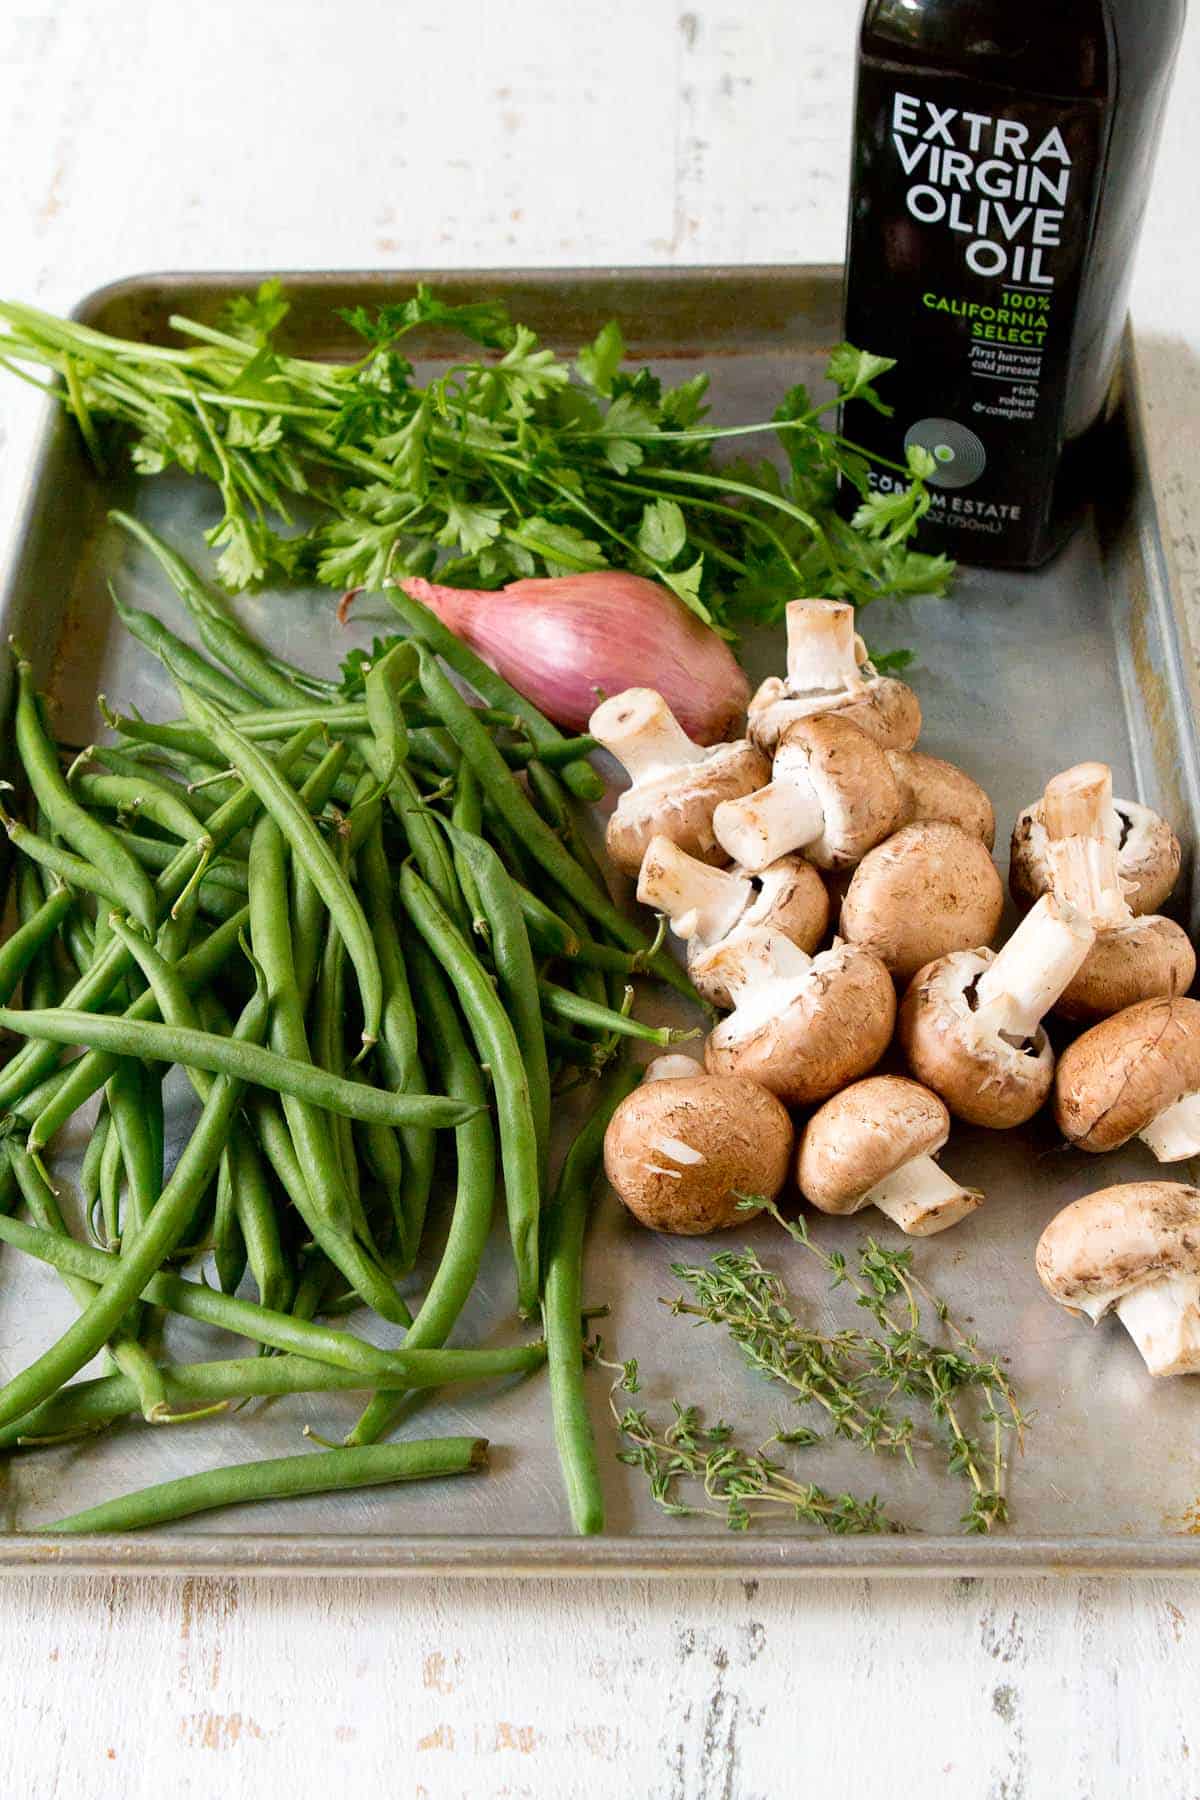 Ingredients for green beans and mushroom side dish on a baking sheet.